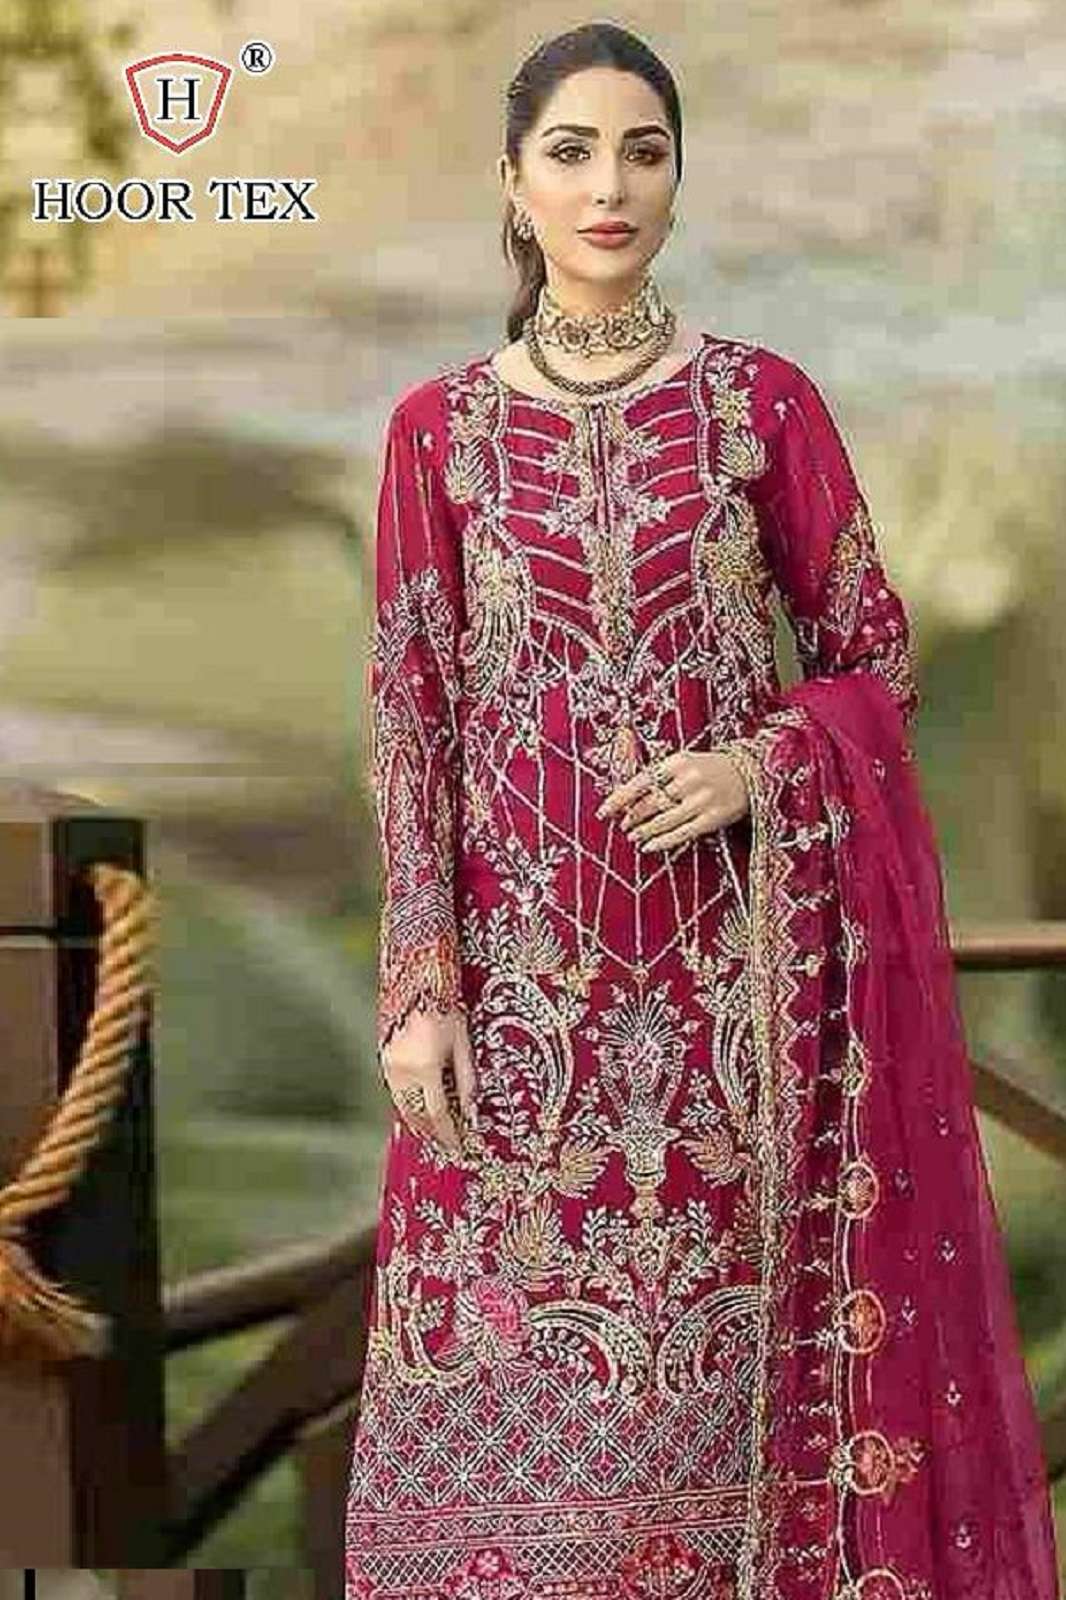 HOOR TEX H 200 A TO D PAKISTANI SUITS COLLECTION